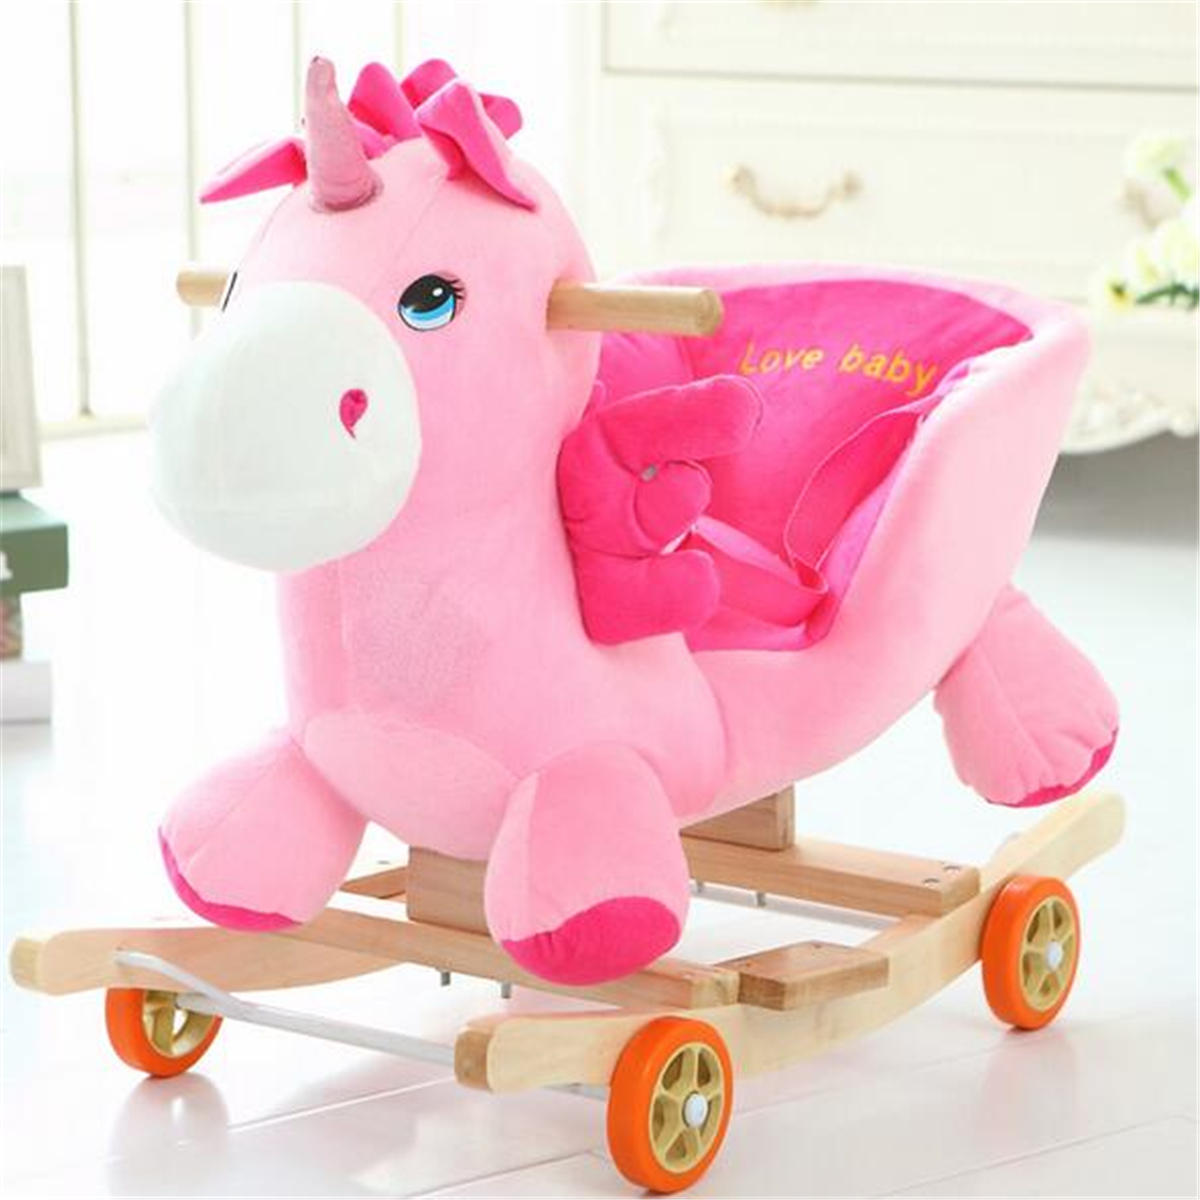 wooden horse toy for baby